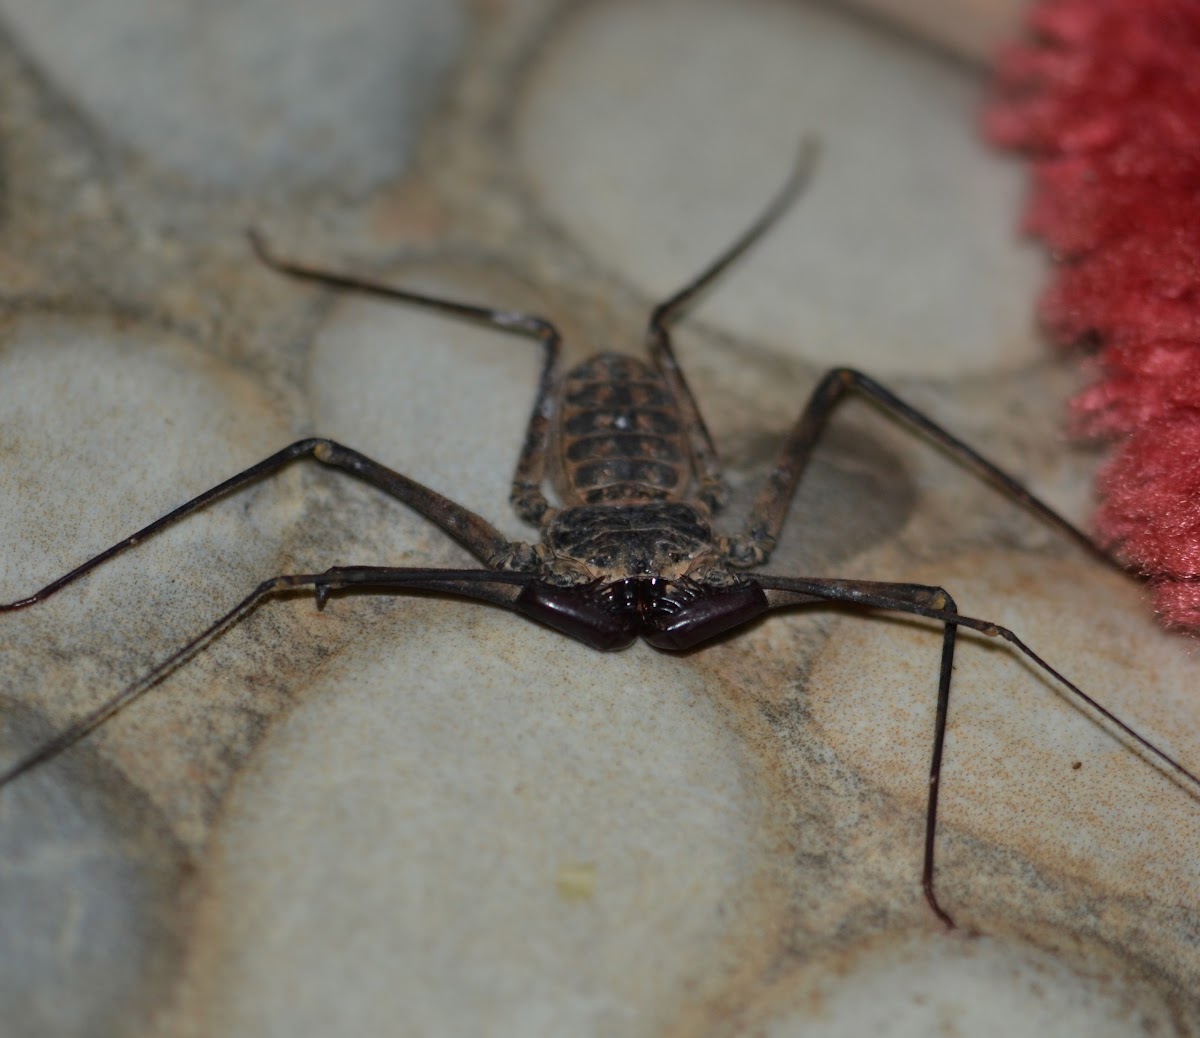 Tail-less Whip Scorpion